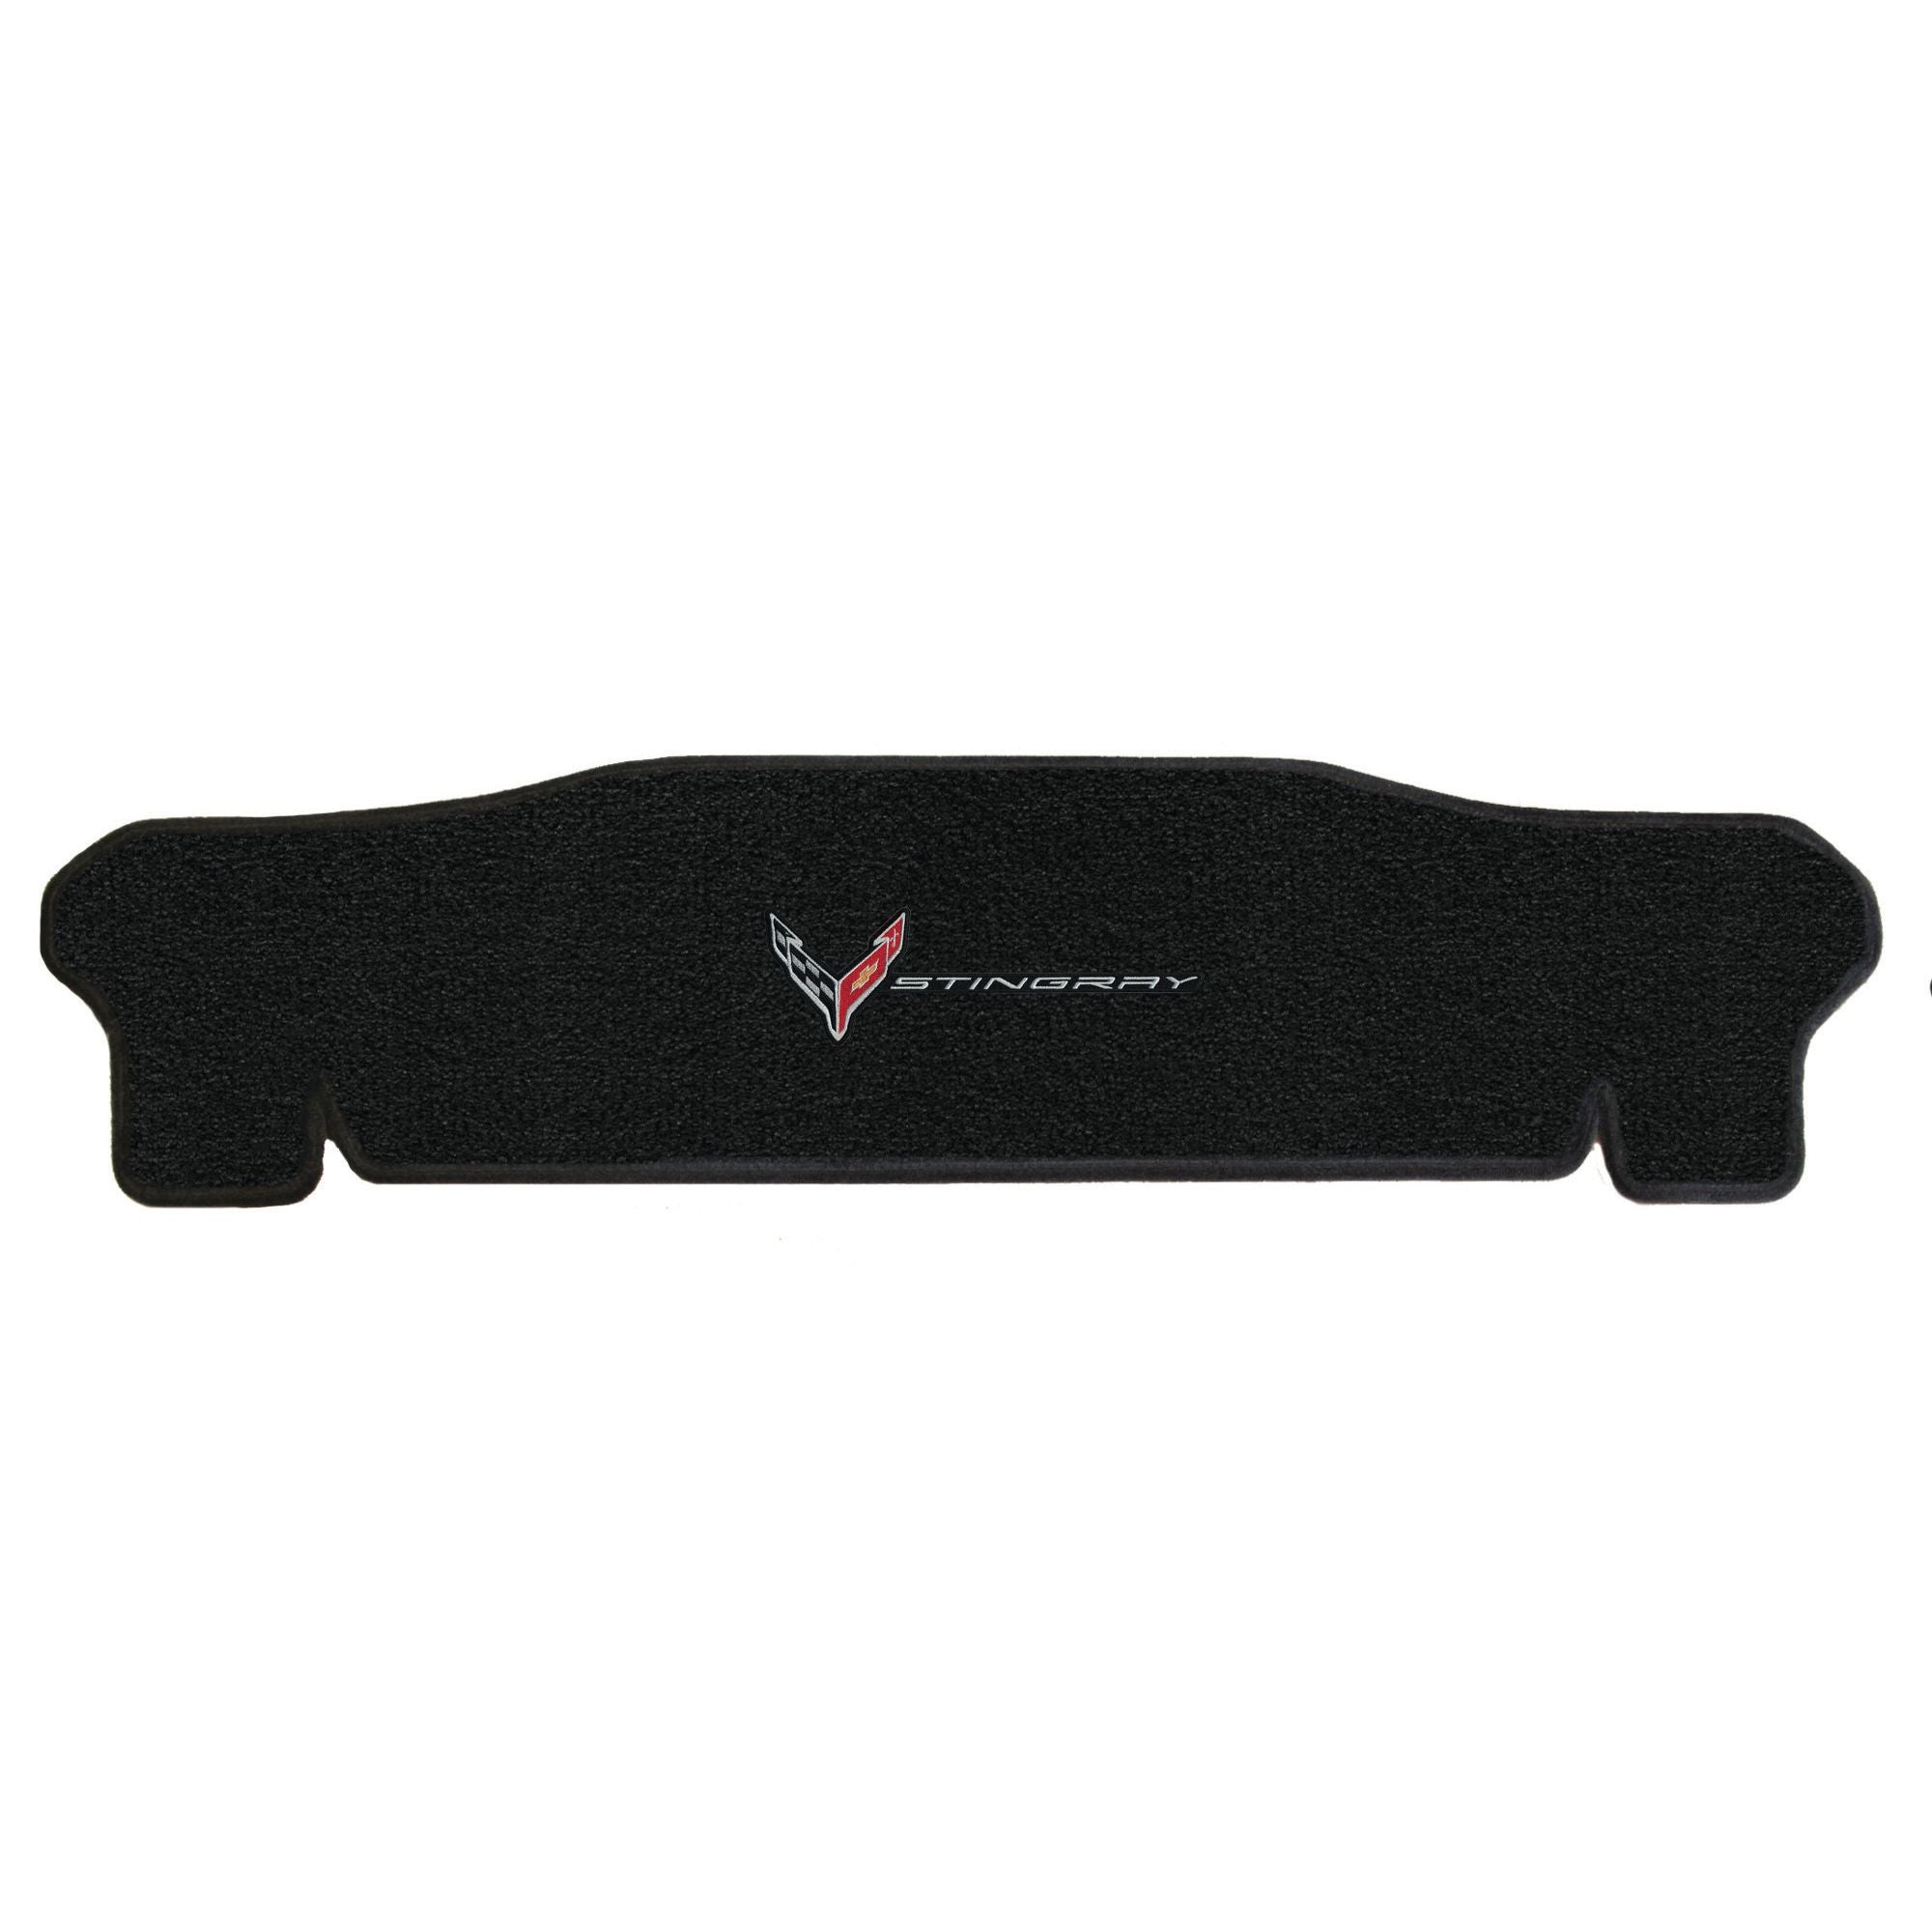 C8 Corvette Rear Cargo Mat - Lloyds Mats With Flags and Stingray Combo : Coupe